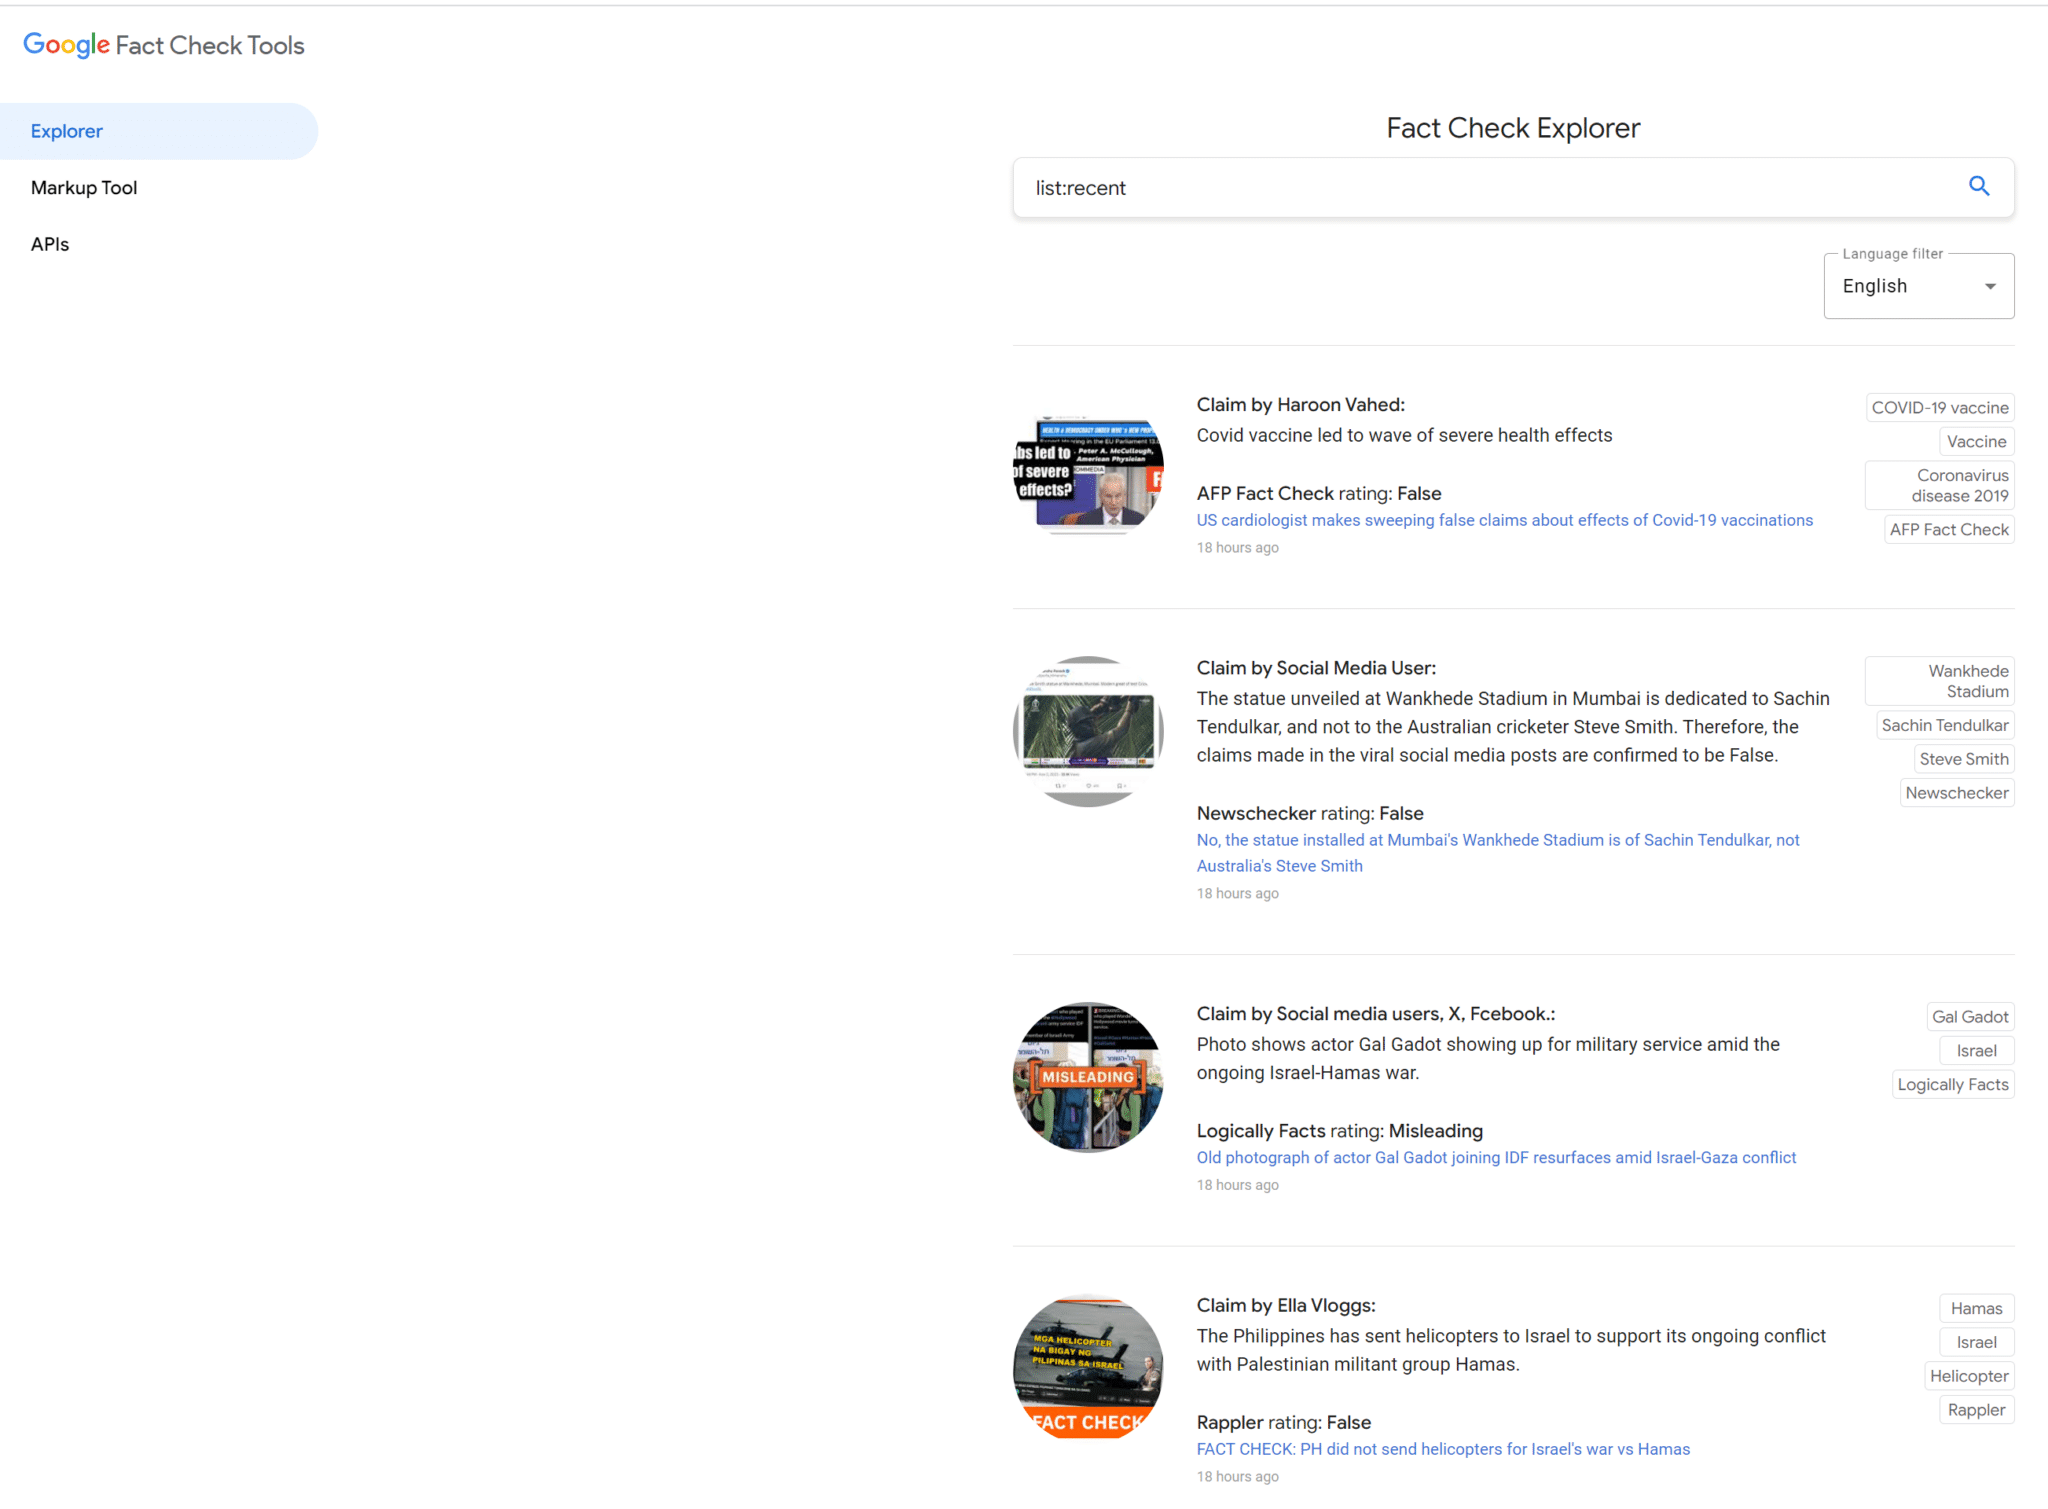 Google Fact Check Tools home page with a results menu of fact checked content with keywords for each. 